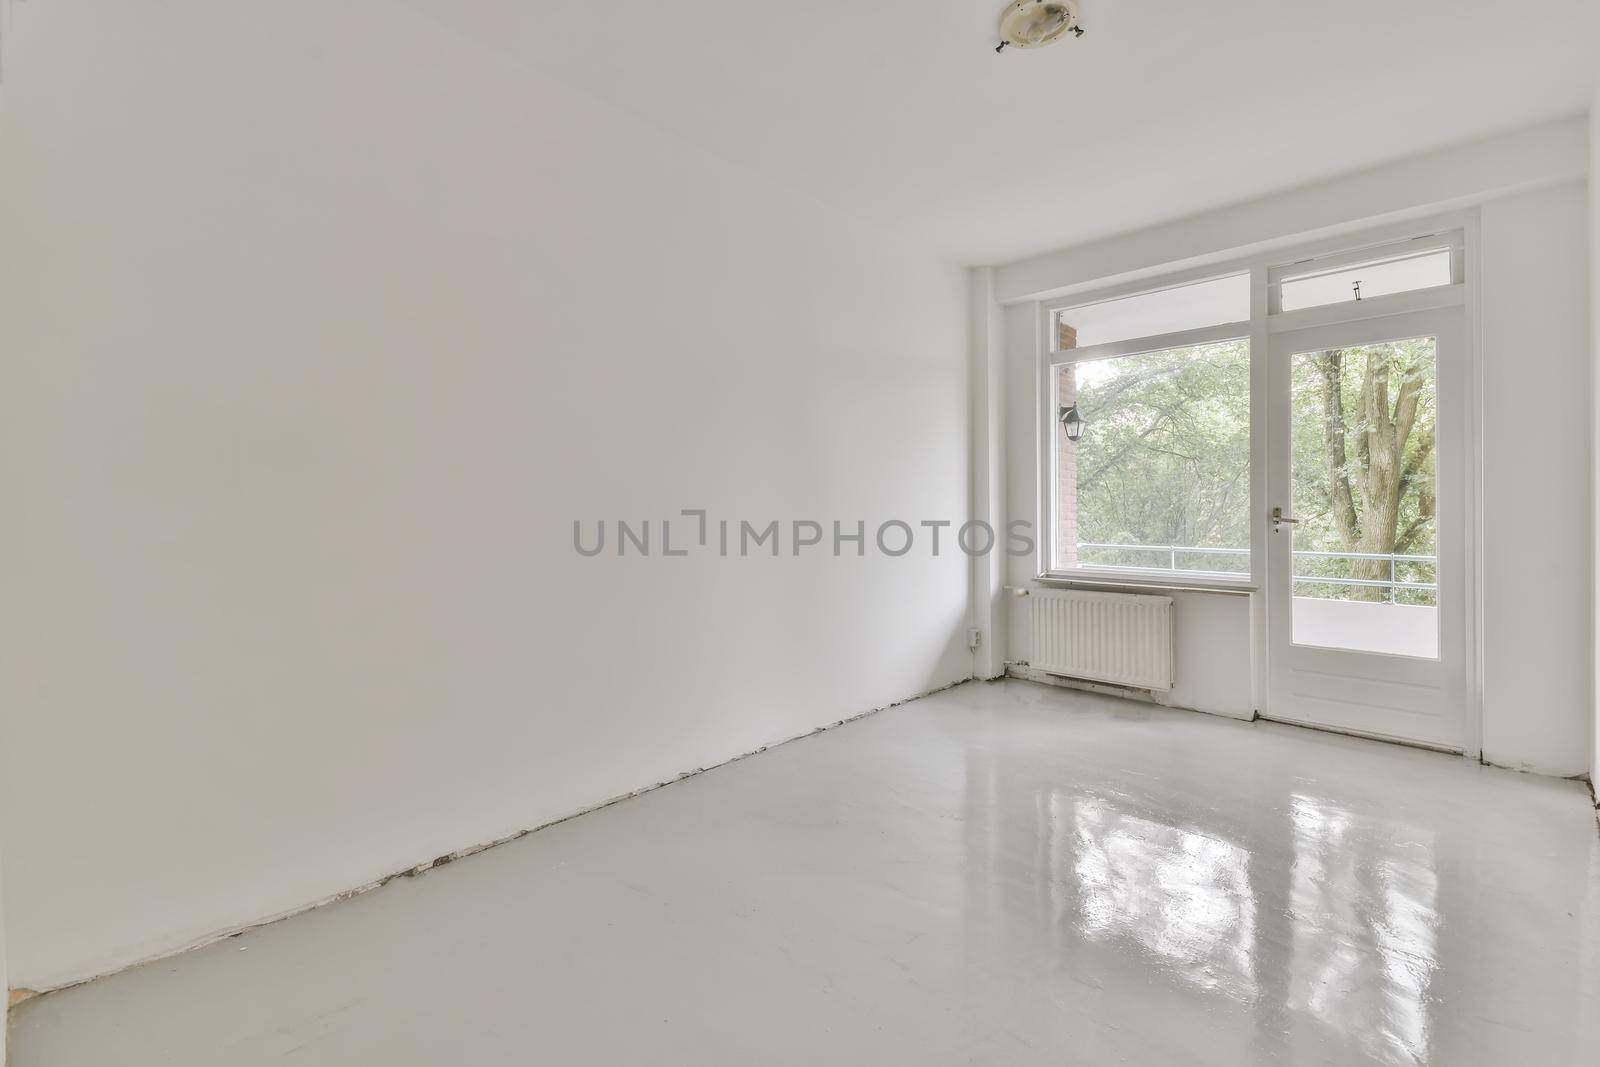 Interior design of bright clean room with window